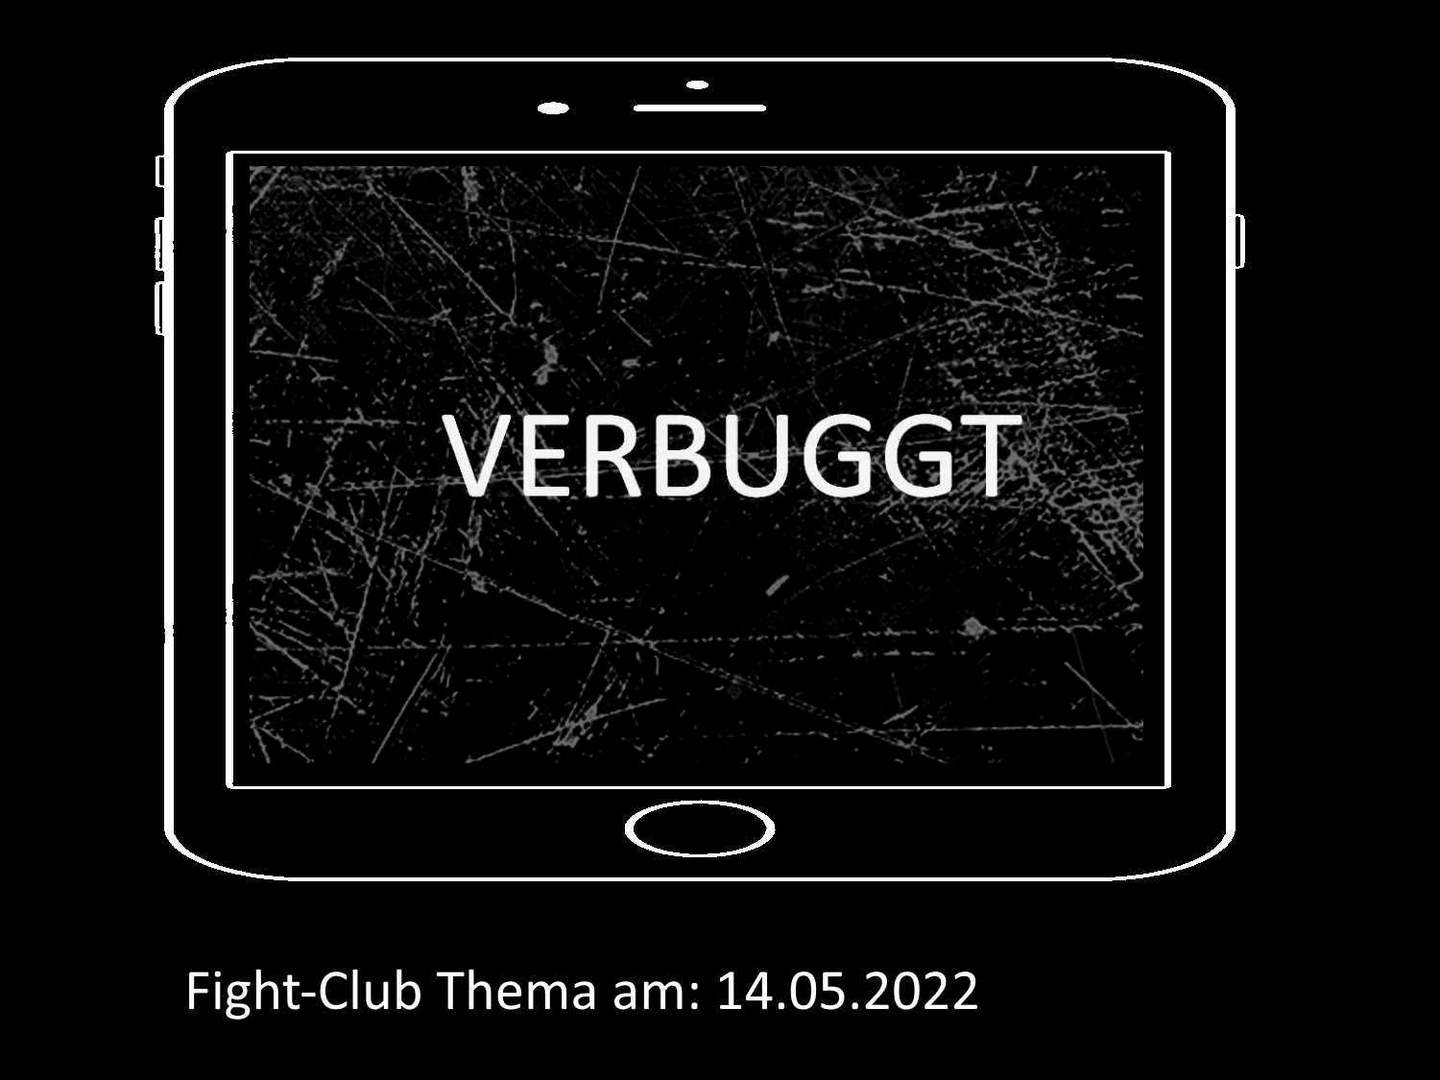 Verbuggt: Fight-Club am 14.05.2022 